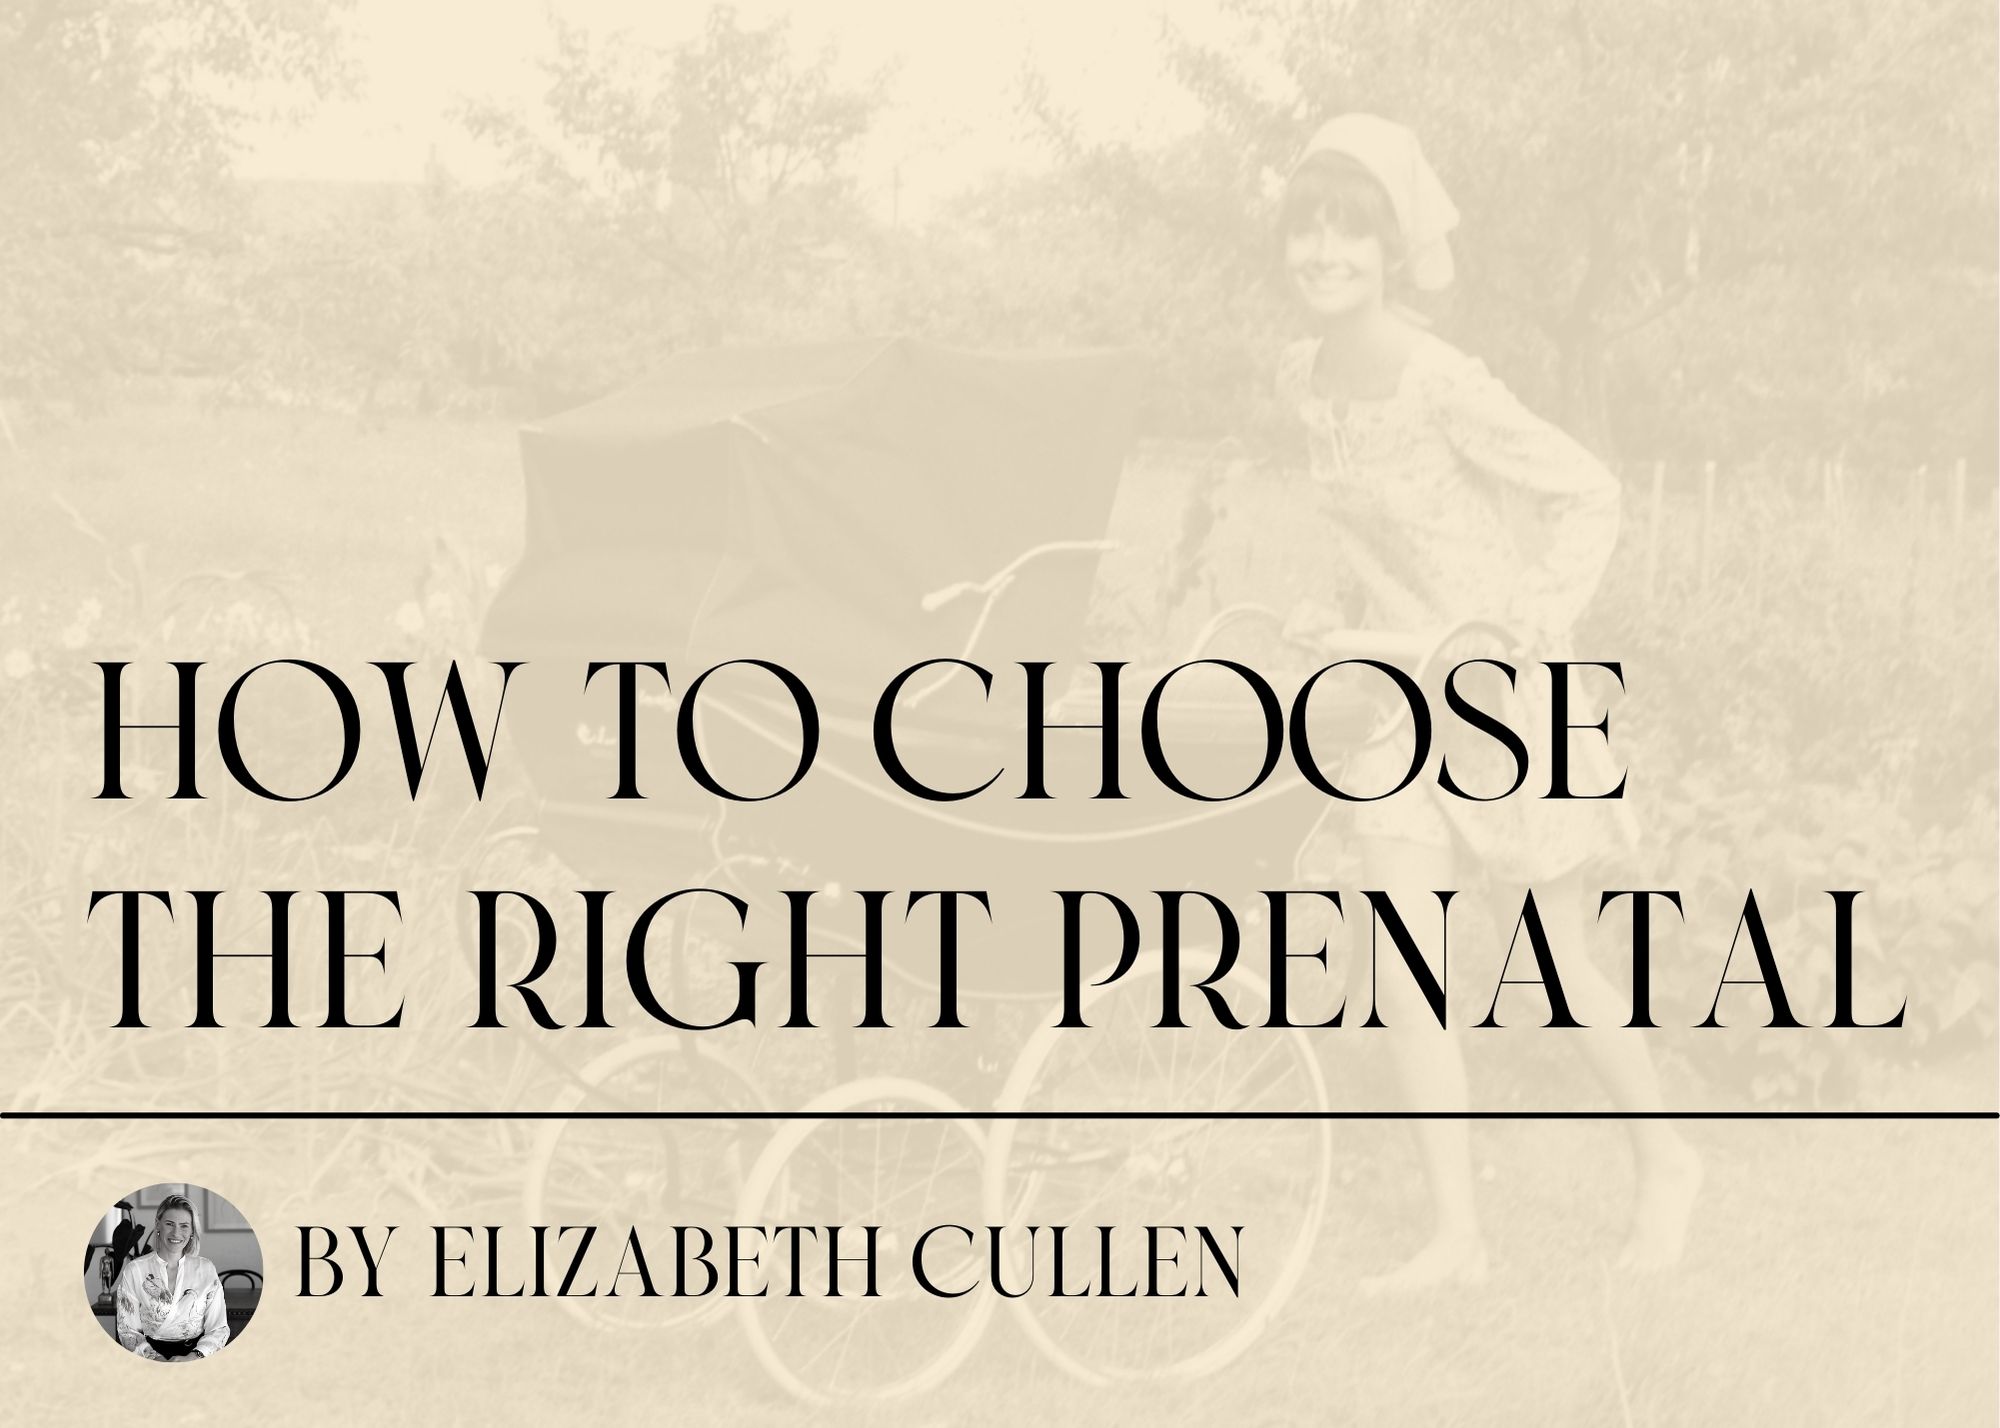 How to choose the right prenatal